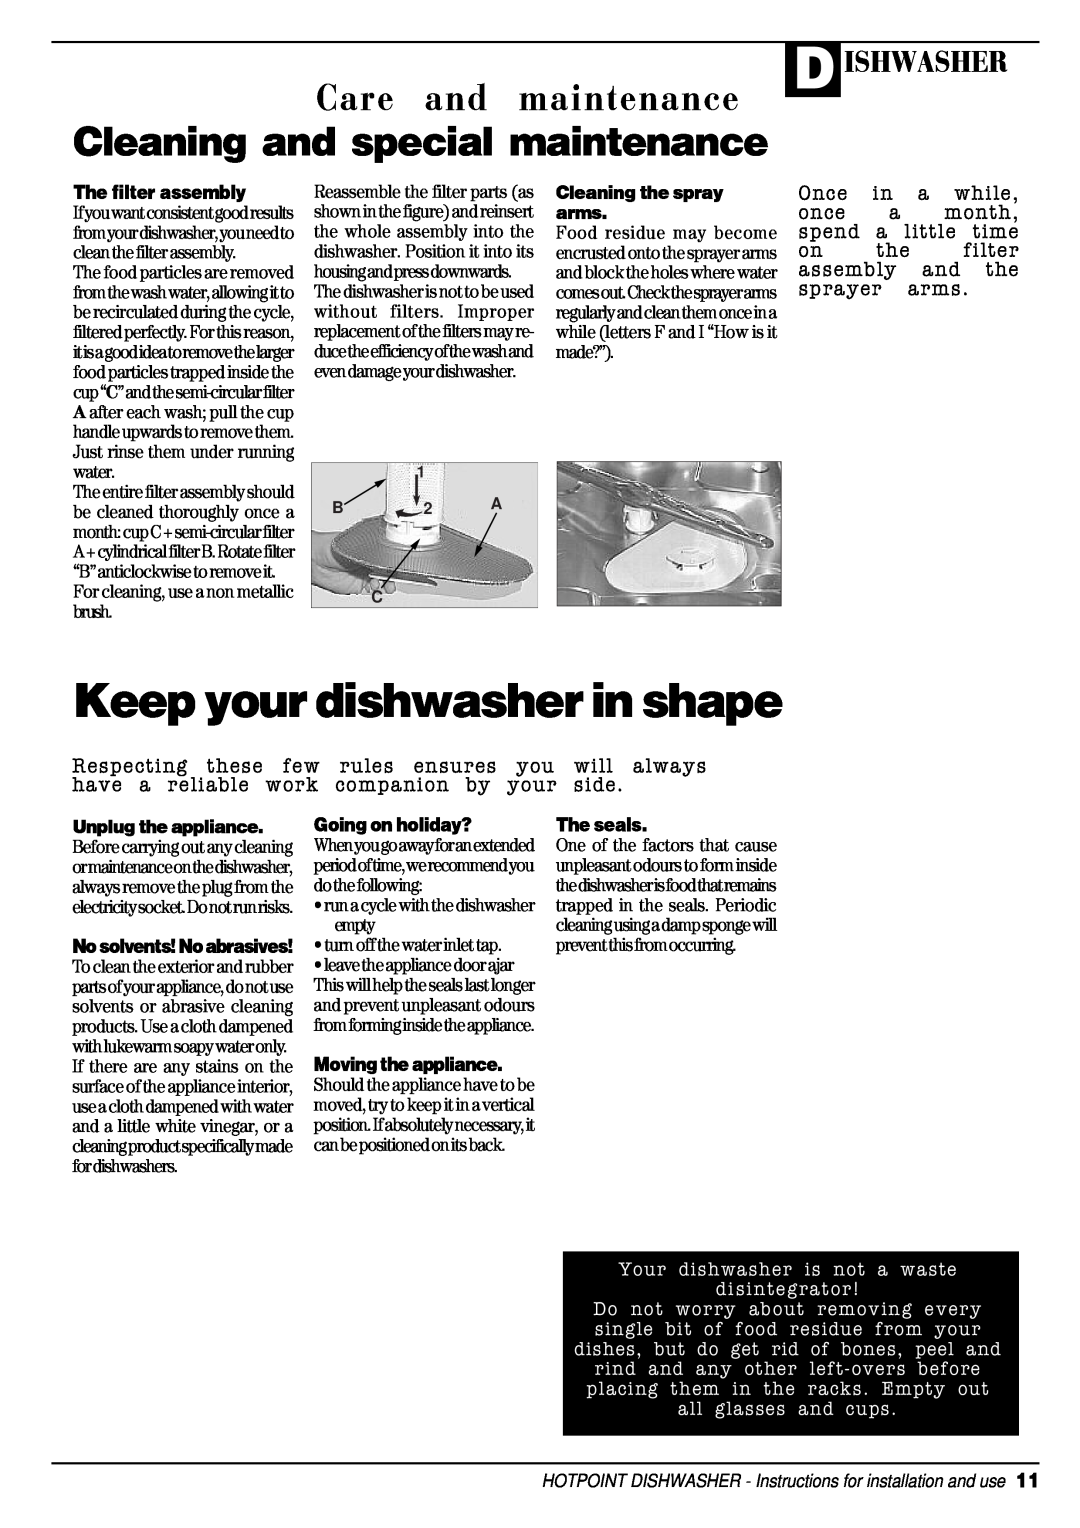 Hotpoint DC 28 manual Keep your dishwasher in shape, Care and maintenance, Ishwasher, Cleaning and special maintenance 